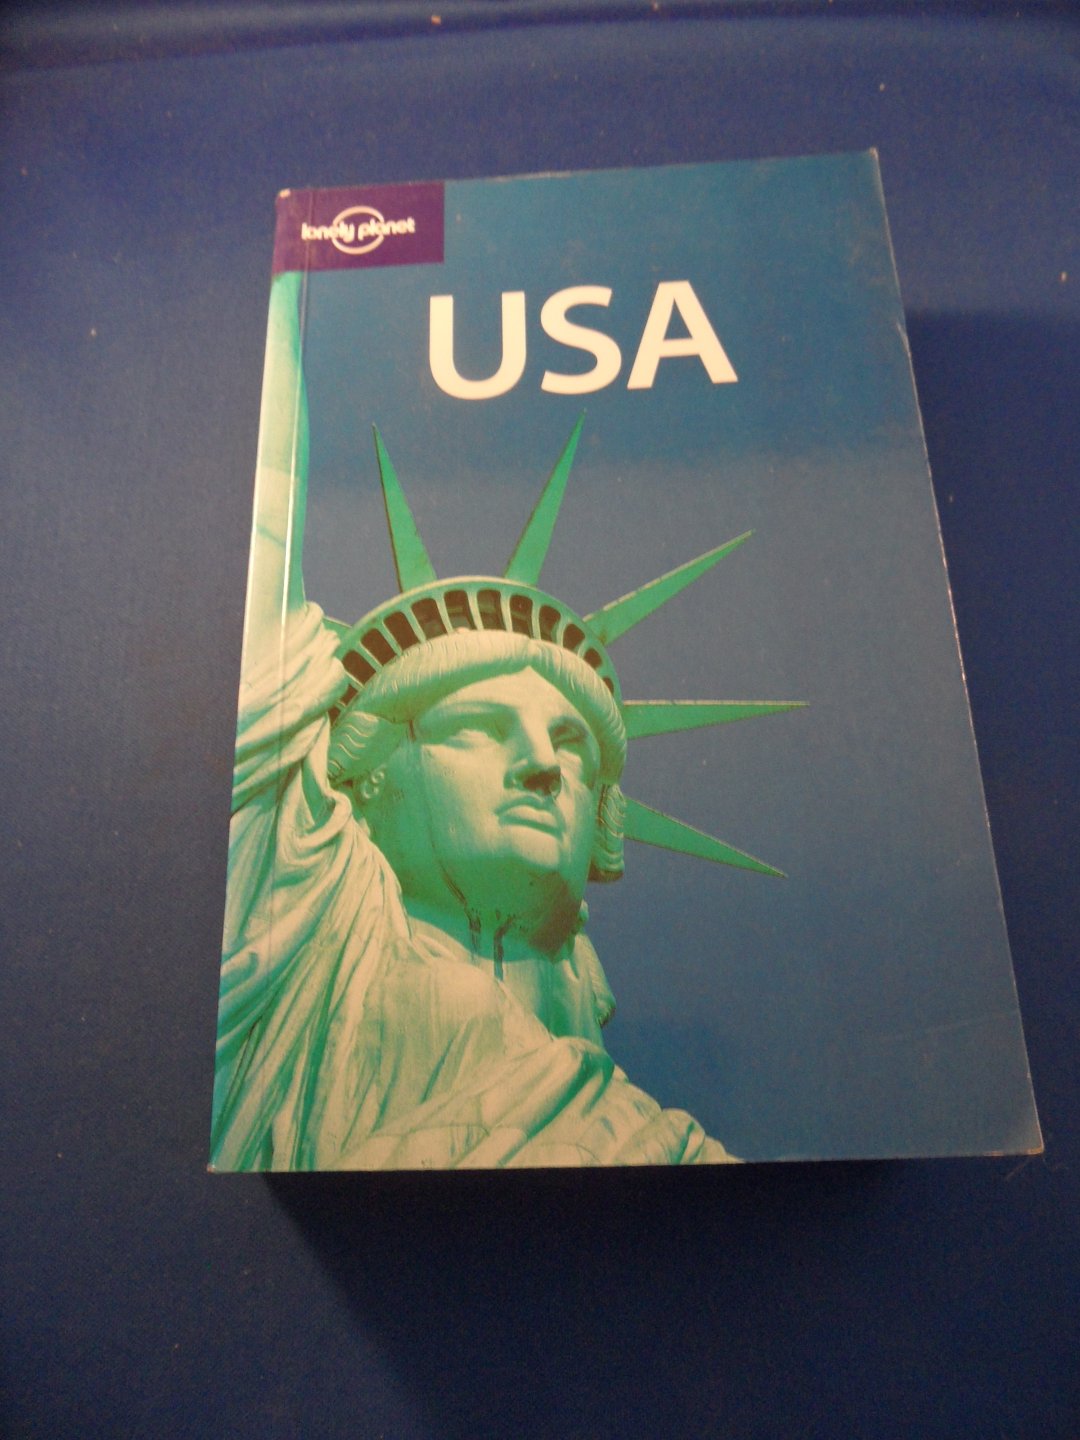  - USA. Lonely planet